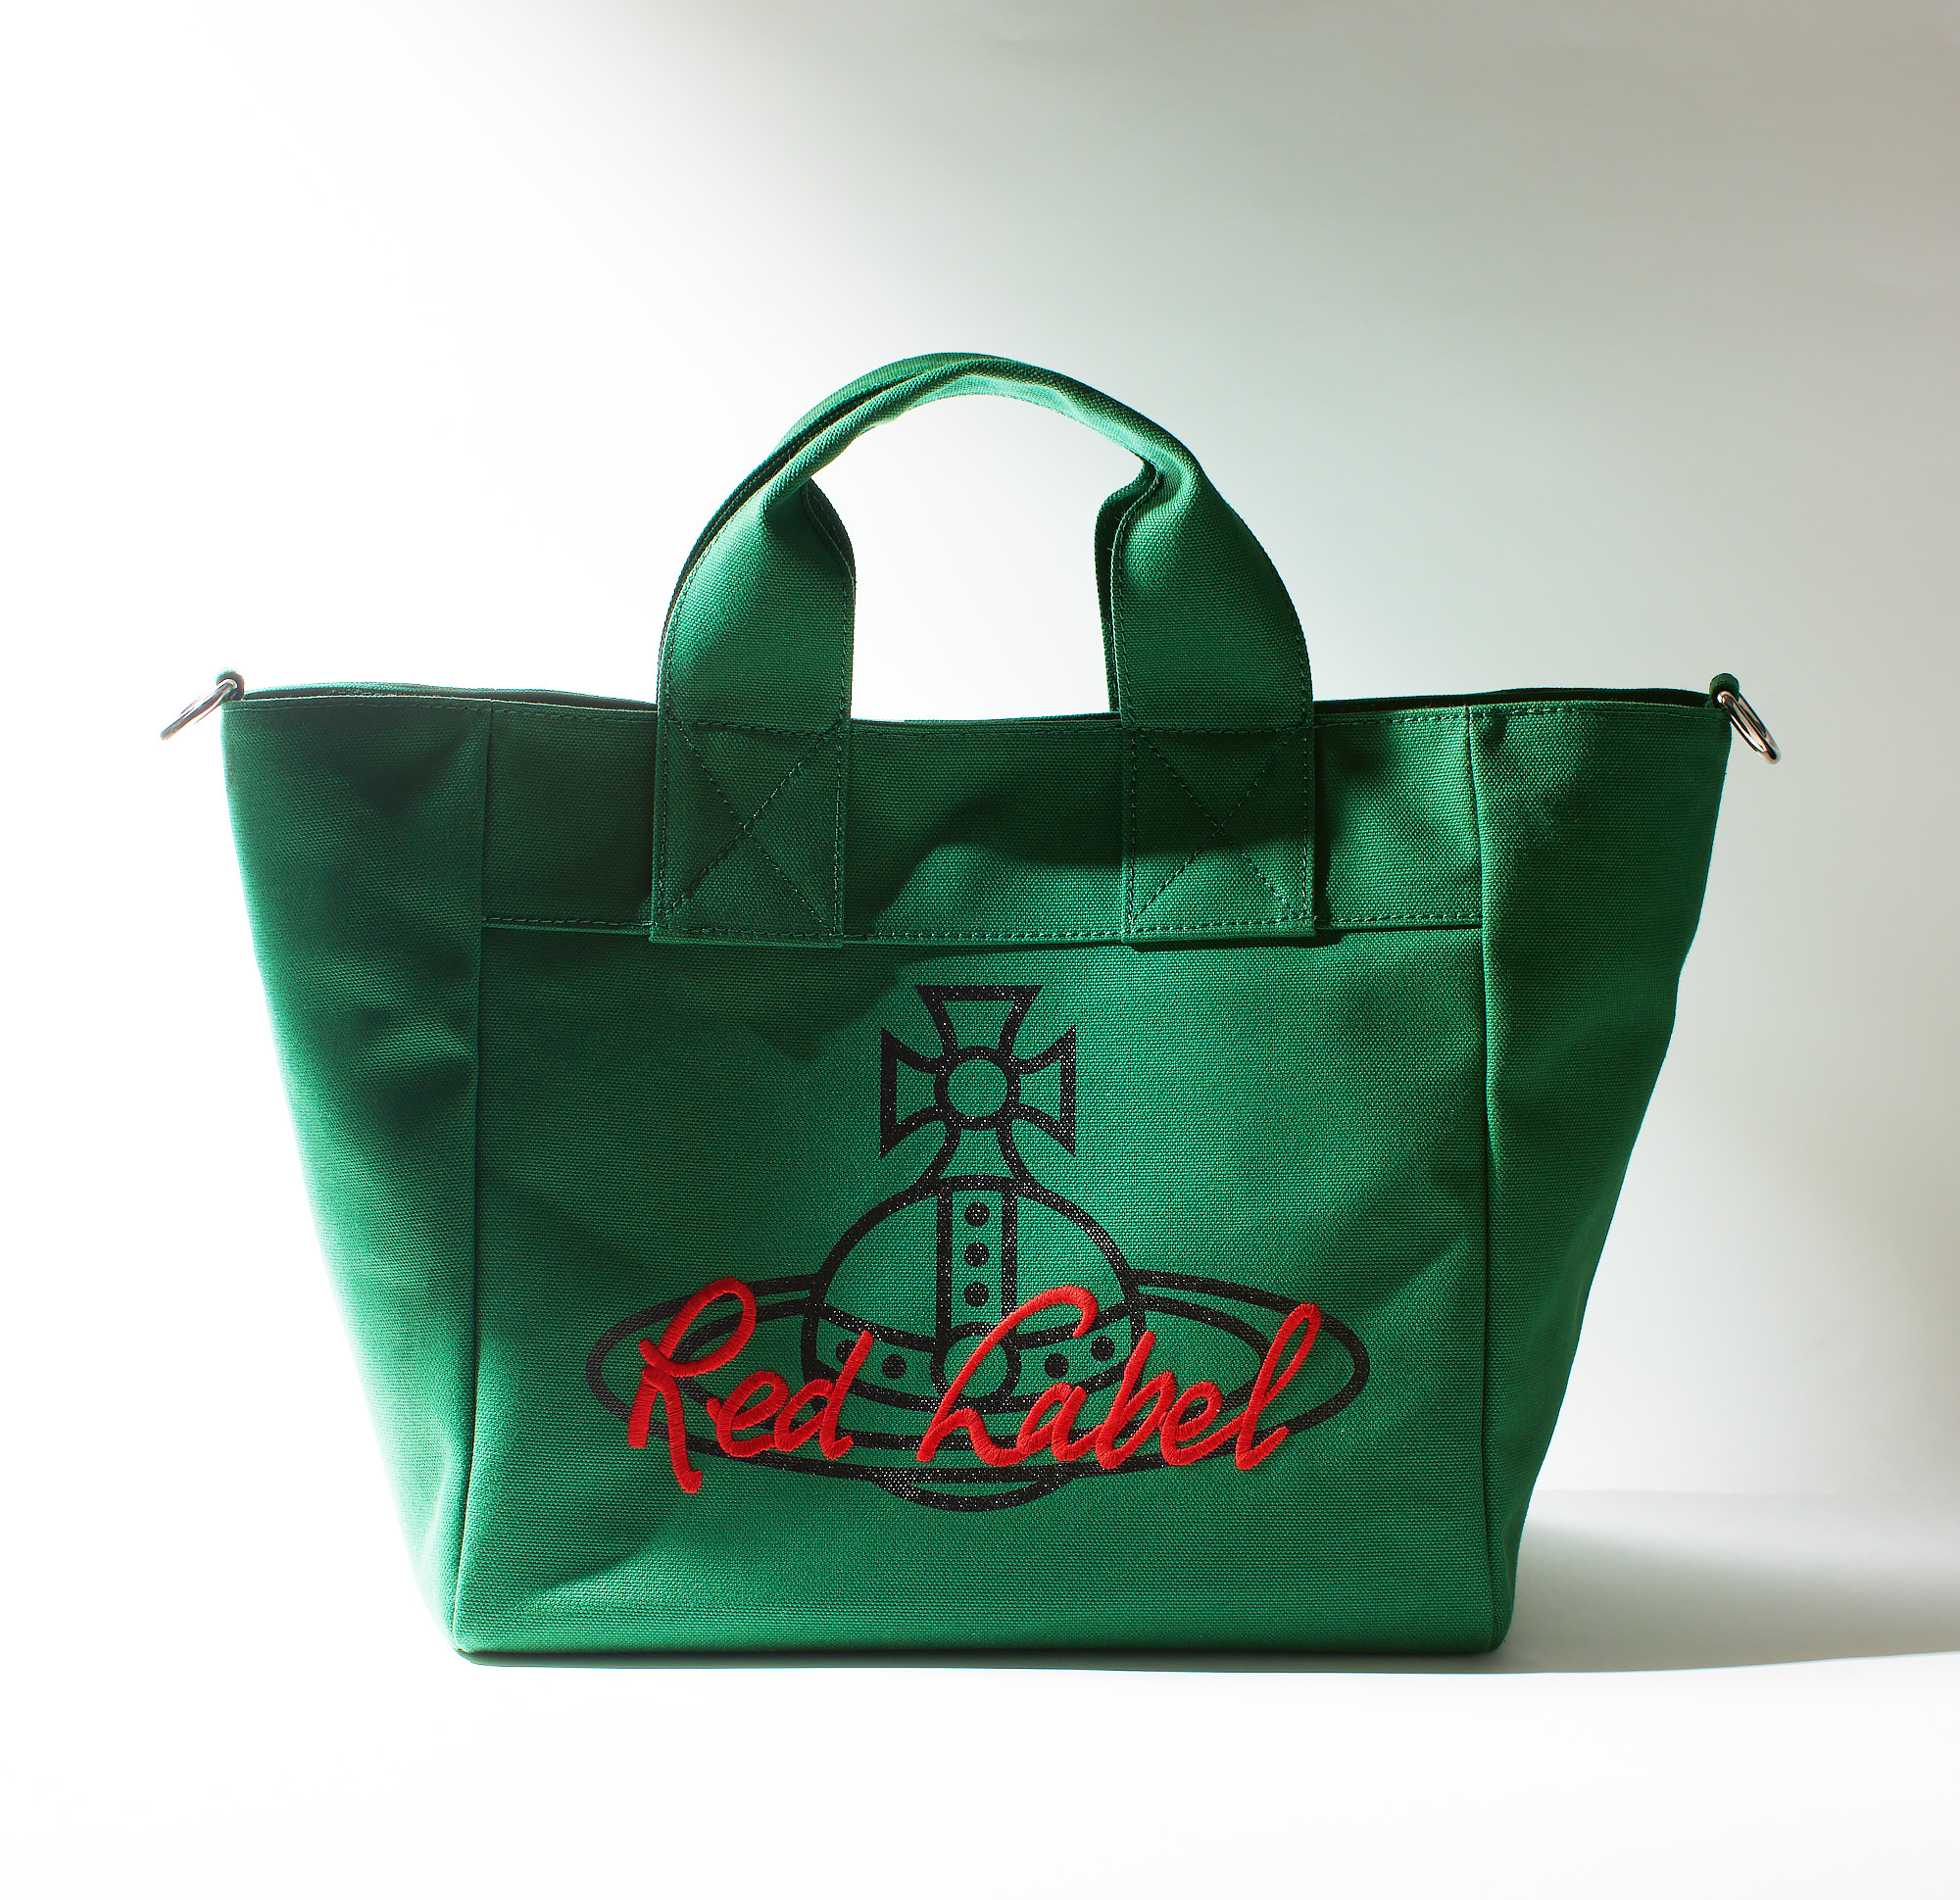 Vivienne Westwood RED LABEL Concept Store “SAPPORO PARCO” 3.17 (Fri) New Open